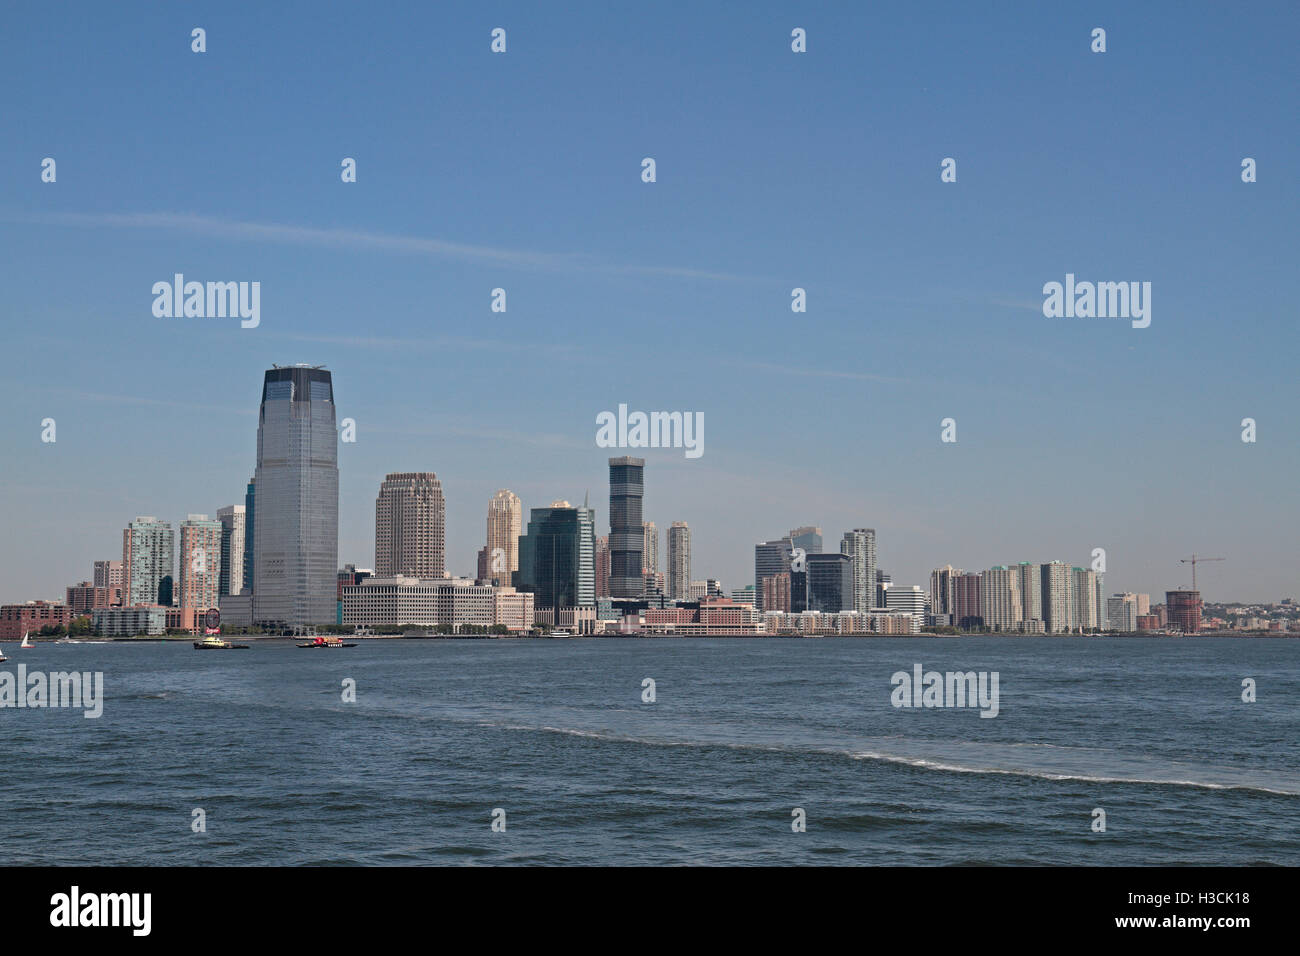 Jersey City in New Jersey viewed from a Staten Island ferry, Upper New York Bay, New Jersey, United States. Stock Photo